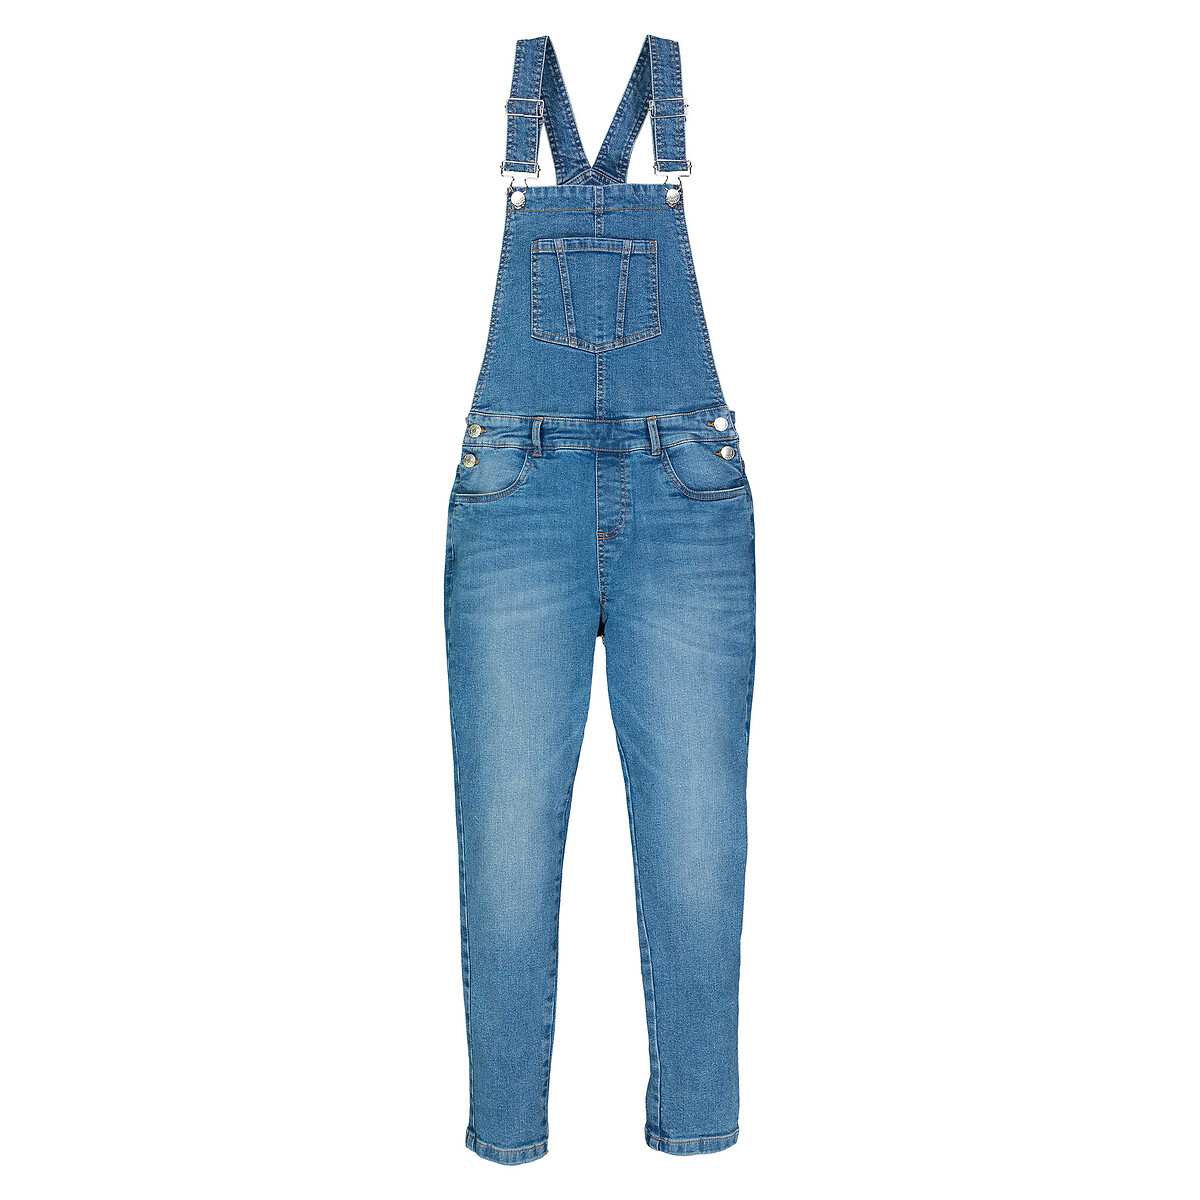 discount 73% Primark dungaree KIDS FASHION Baby Jumpsuits & Dungarees Jean Blue 7Y 